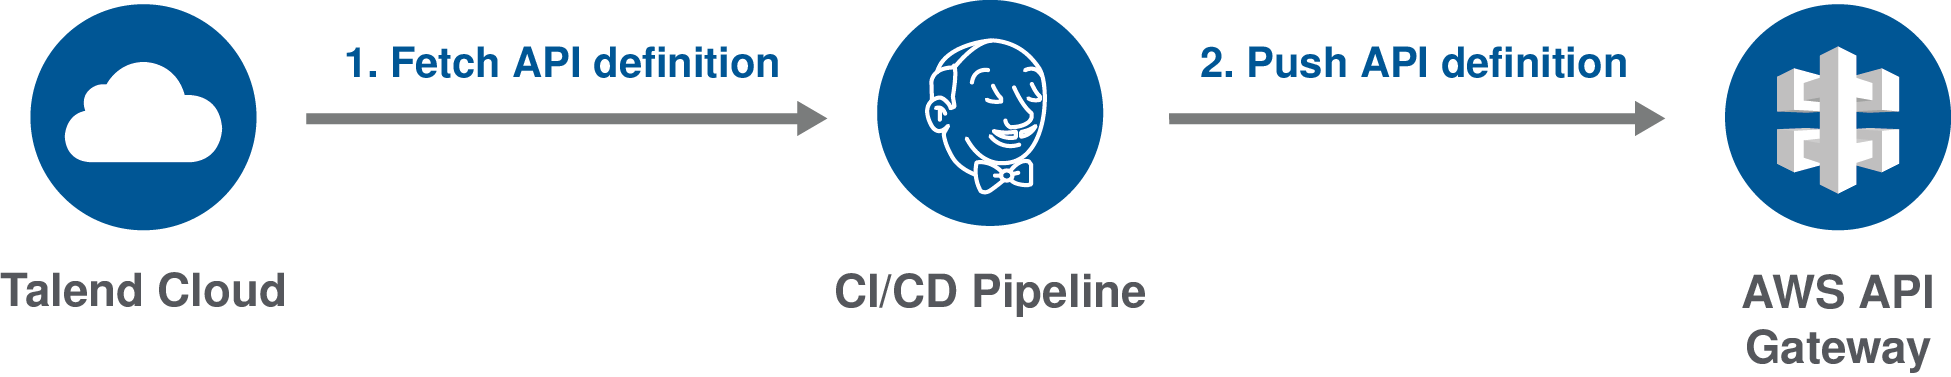 Diagram of the process where the API definition is fetched by the CI/CD pipeline from Talend Cloud and then pushed to the AWS API Gateway.